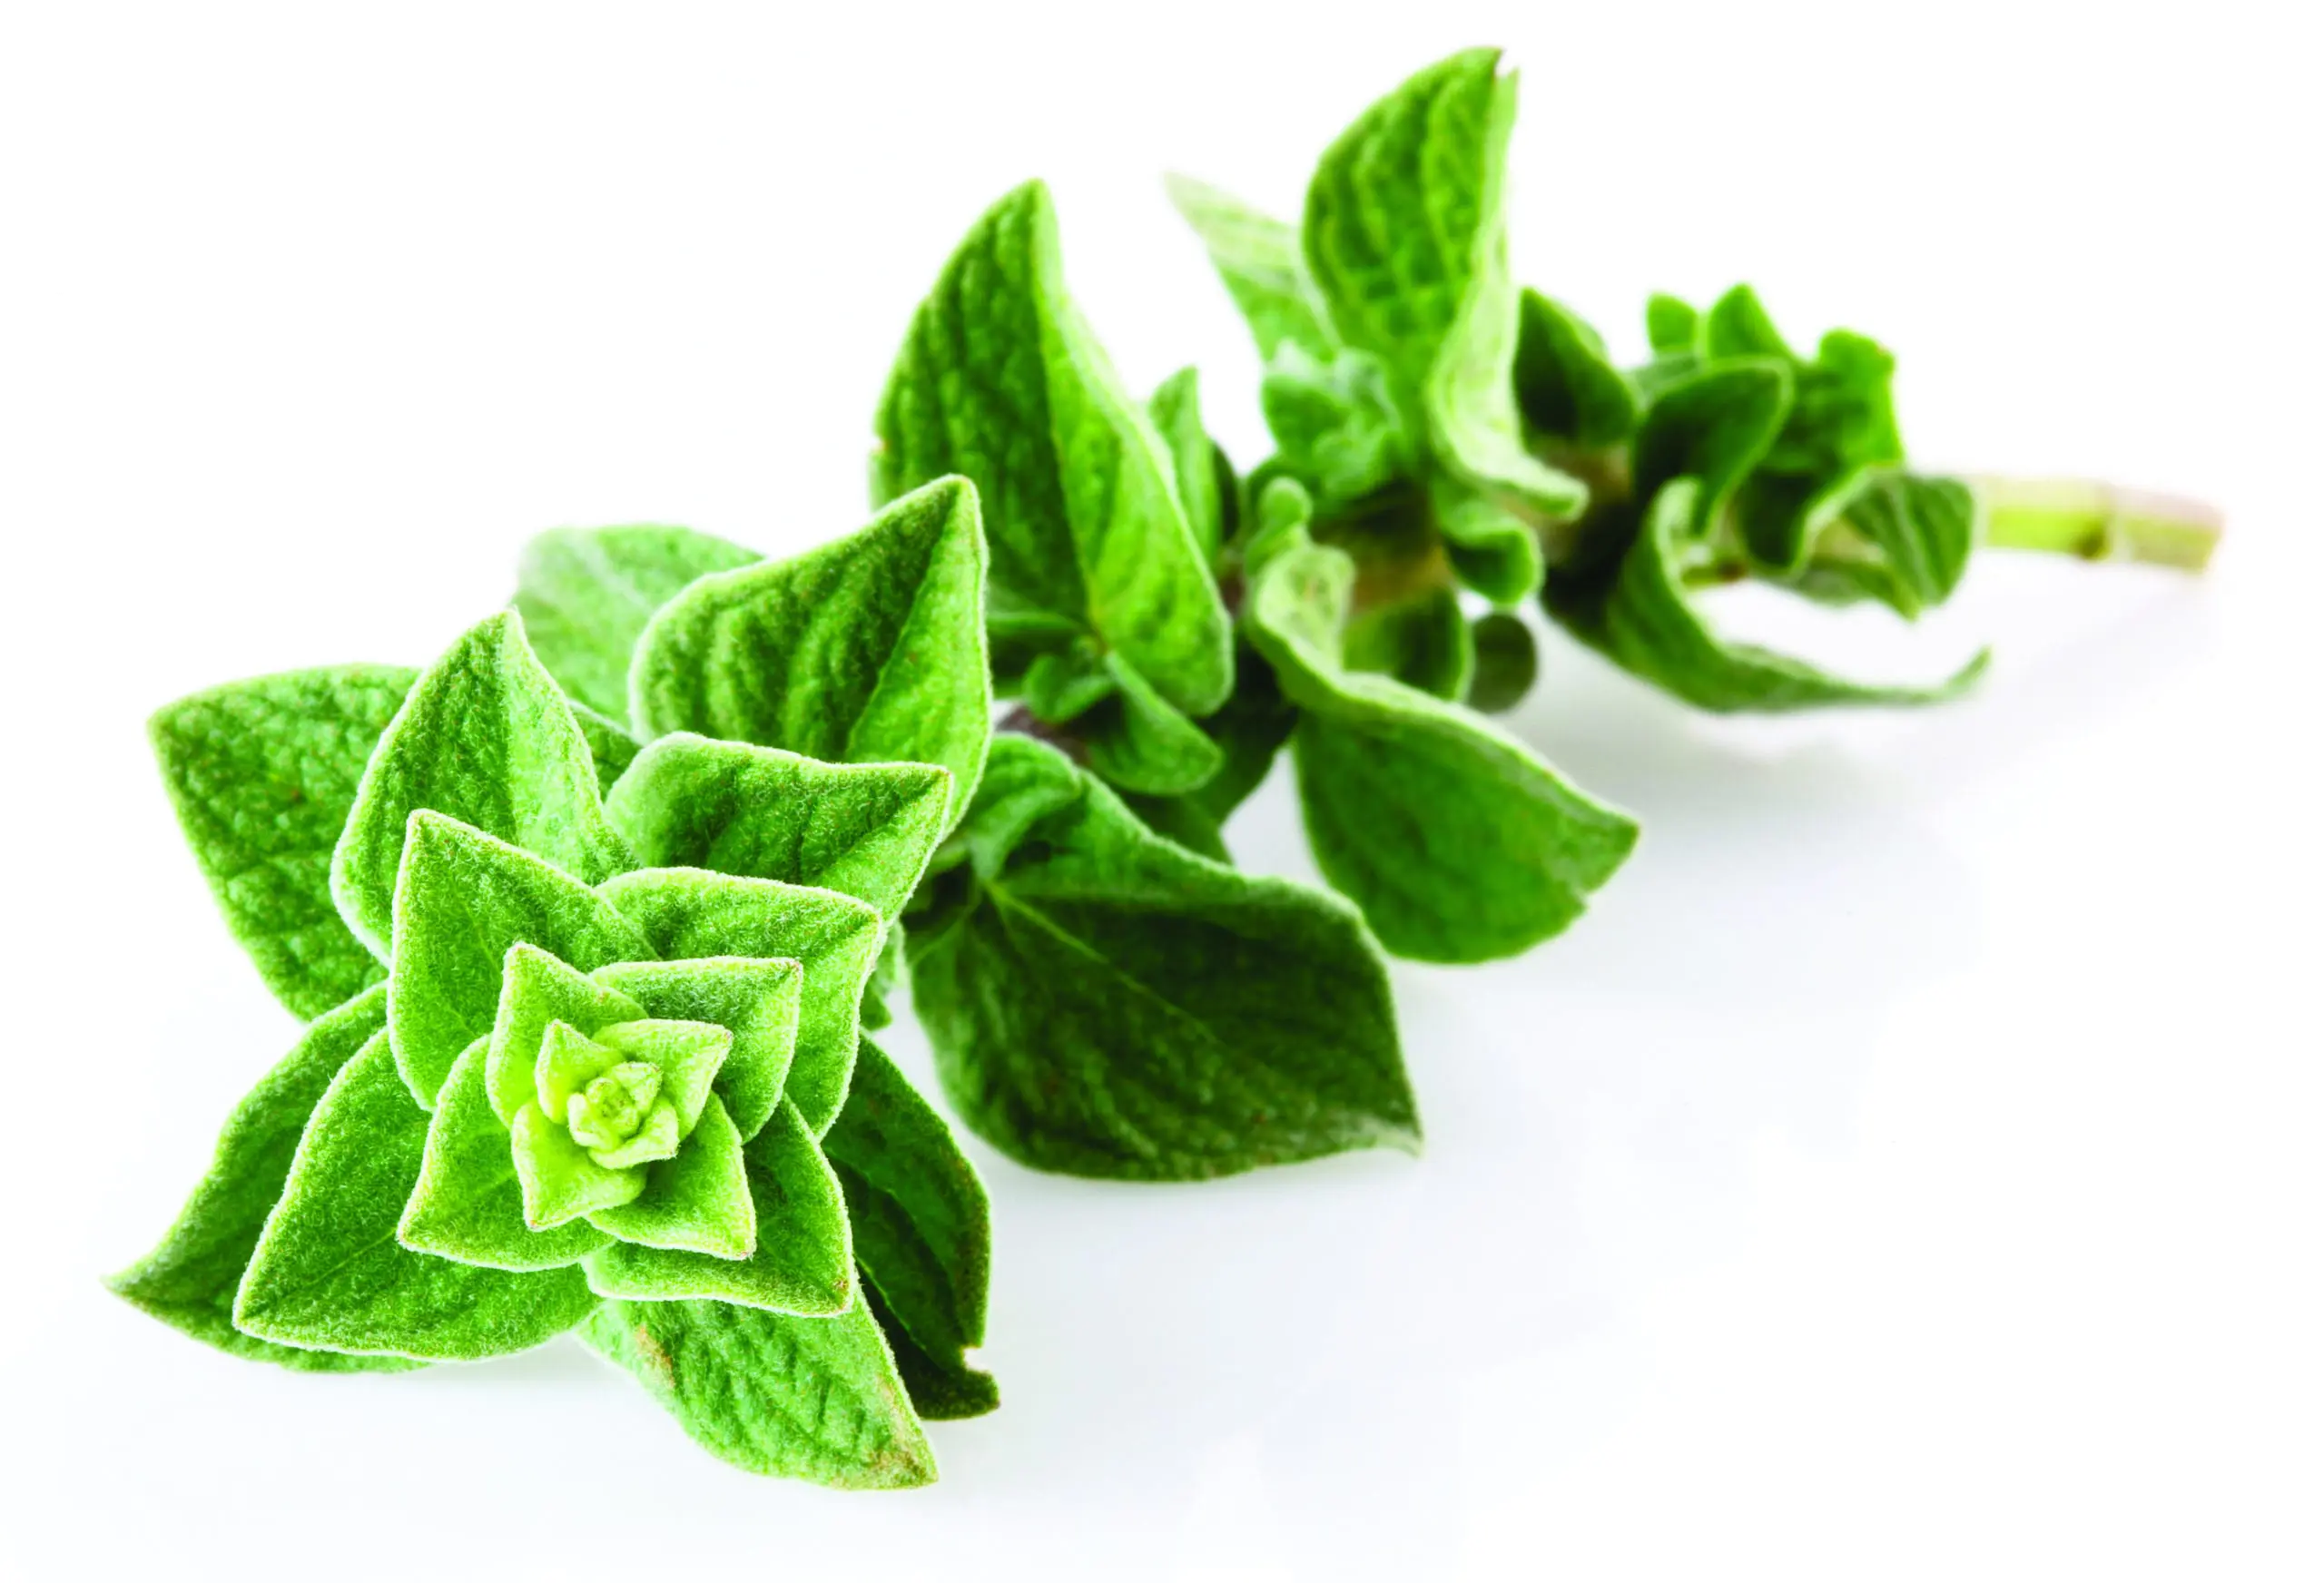 Featured image for “Bay Leaf Potential Health Benefits”